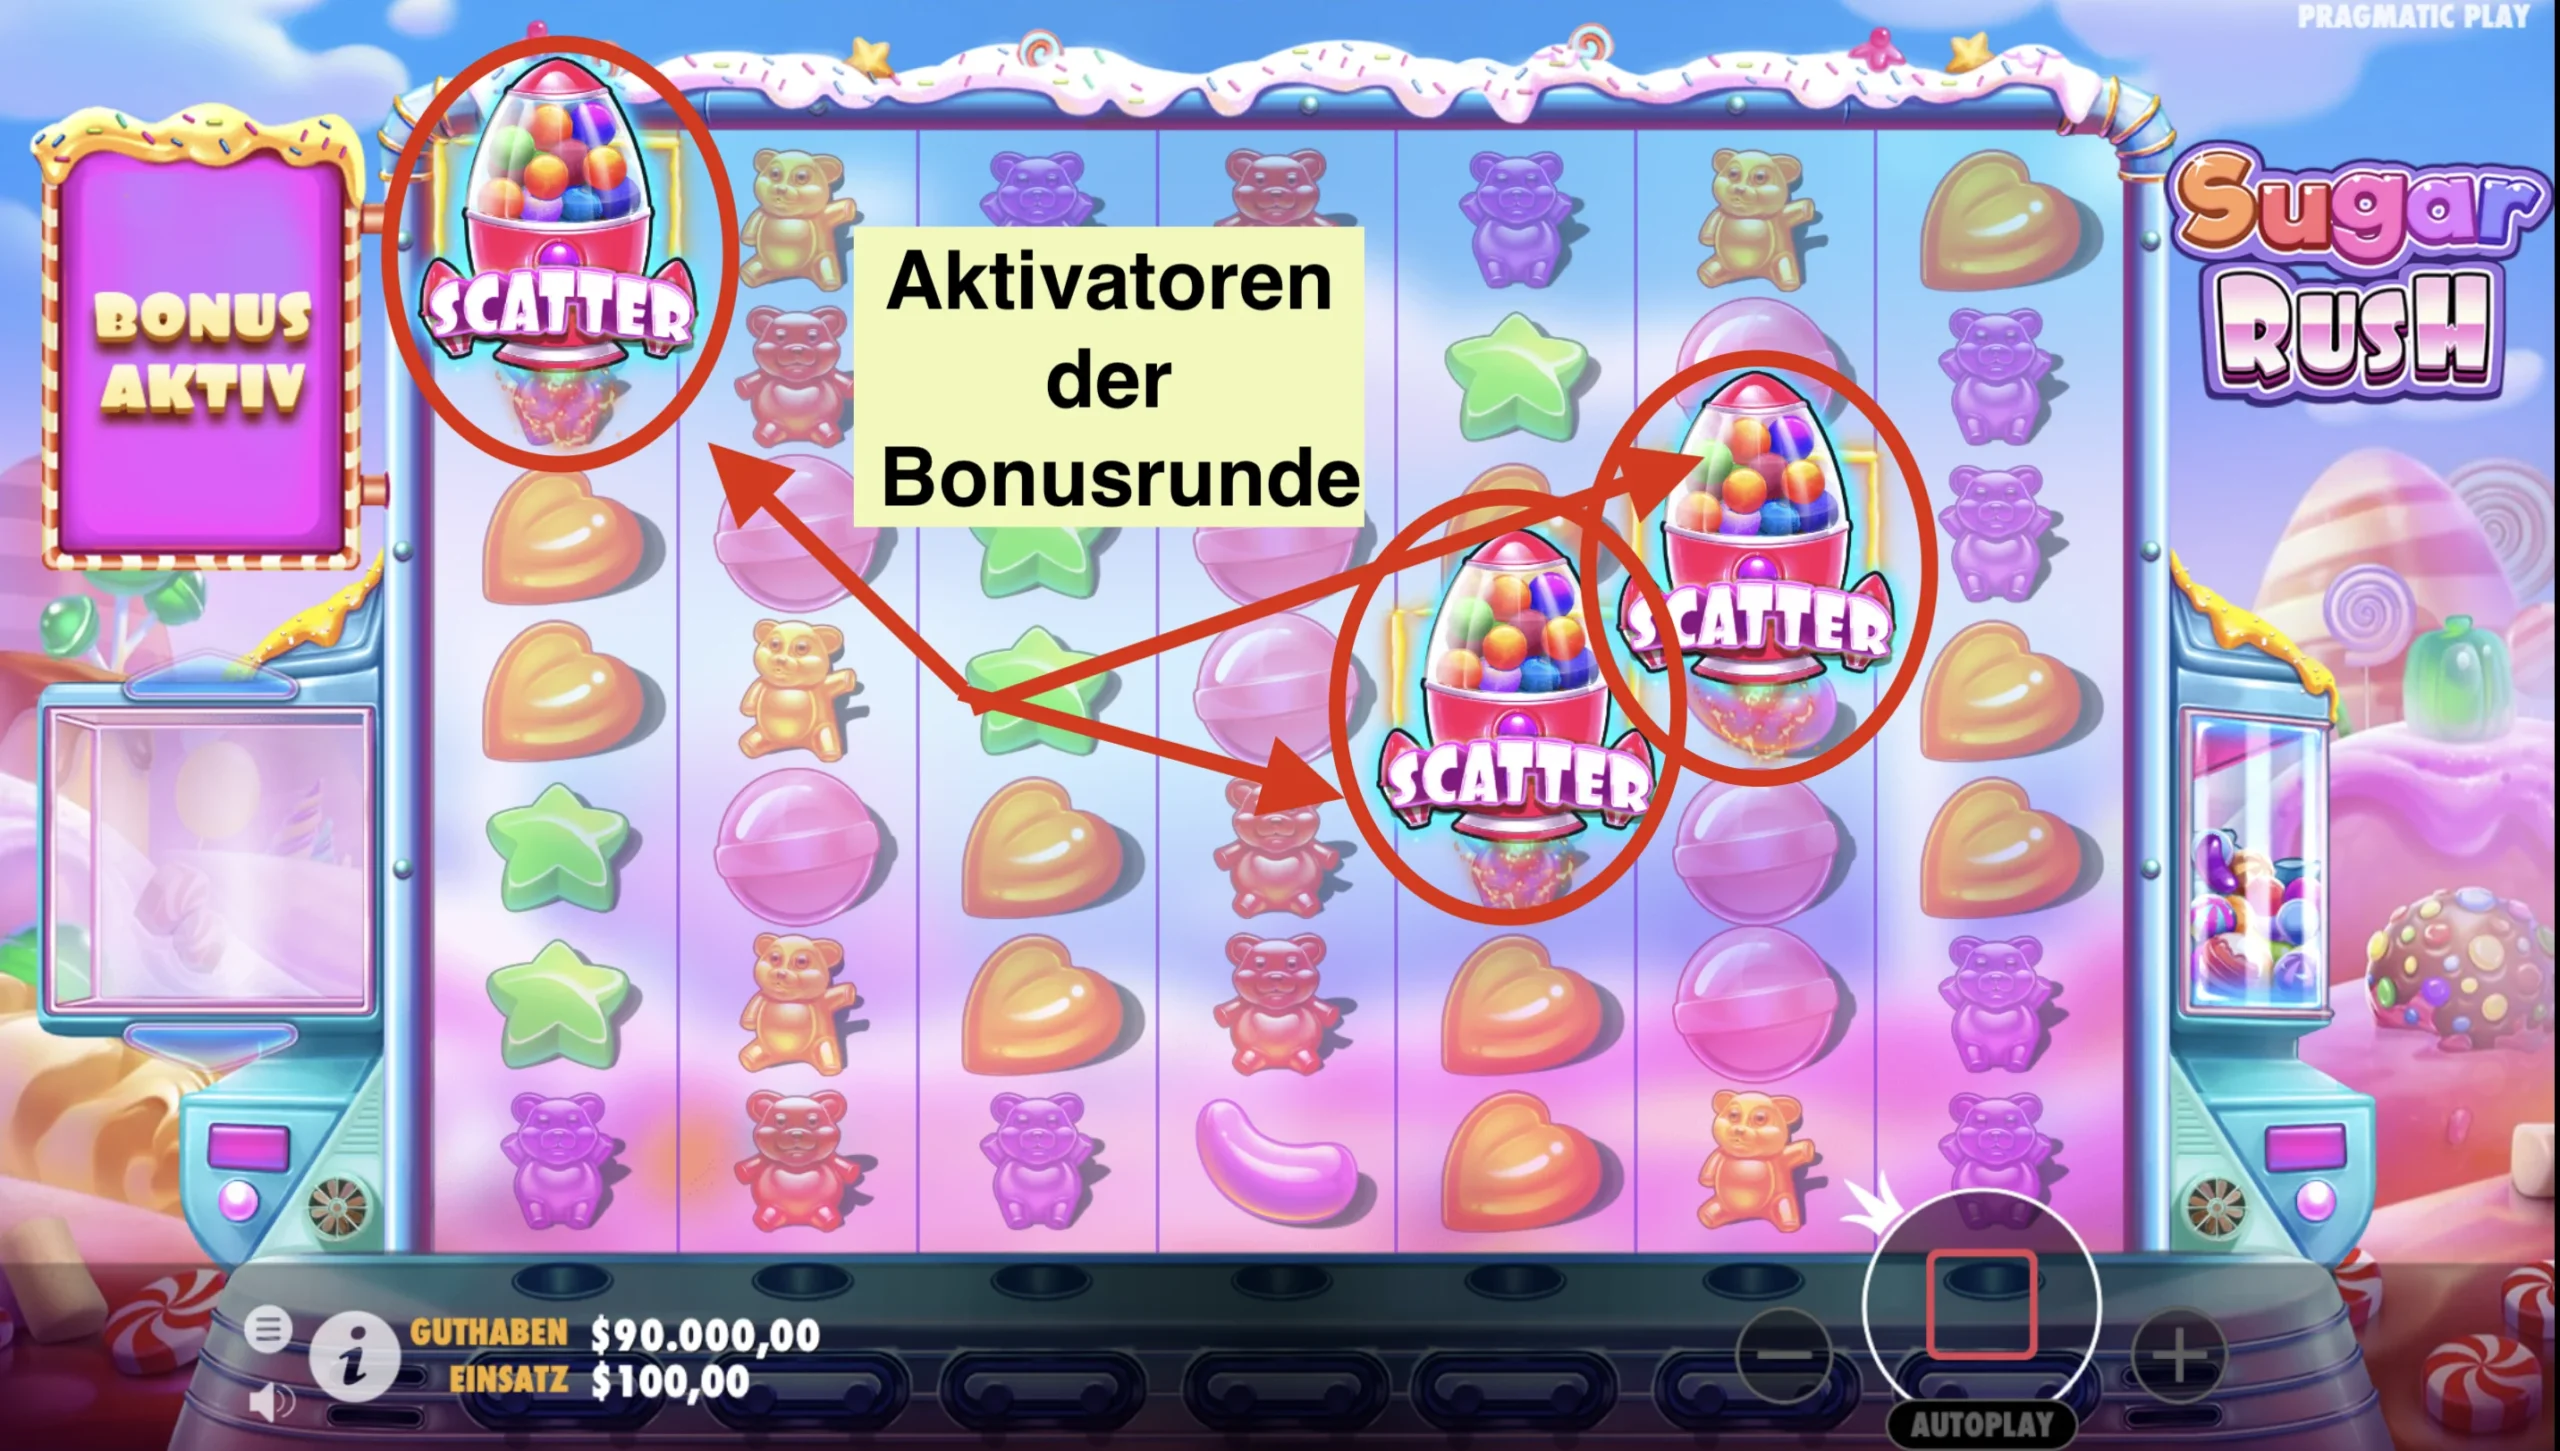 Activate the free spins in Sugar Rush